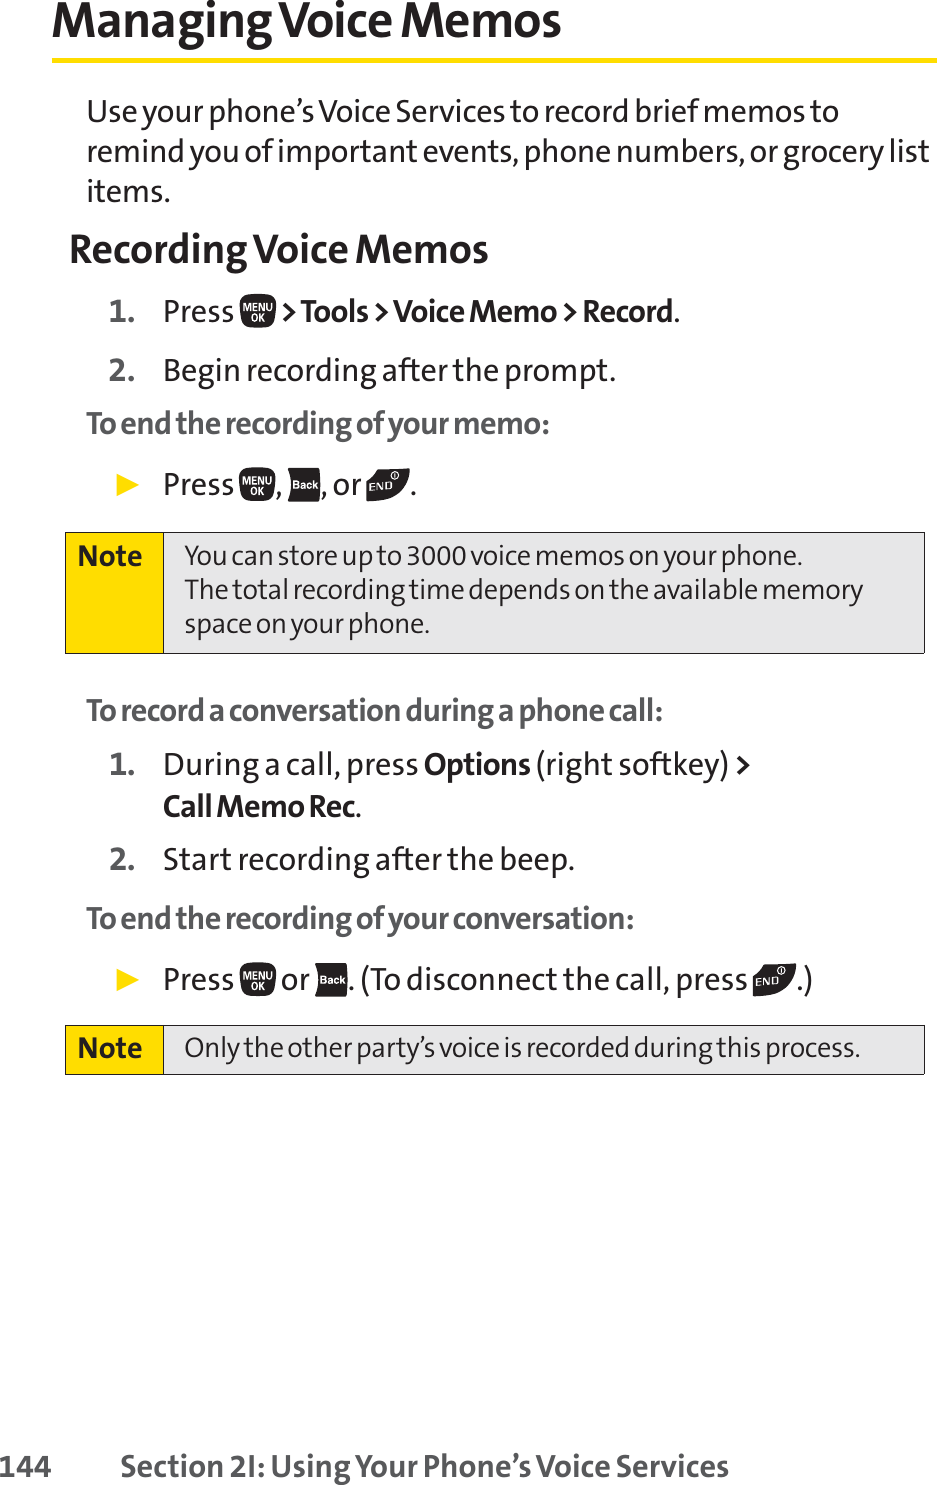 144 Section 2I: Using Your Phone’s Voice ServicesManaging Voice MemosUse your phone’s Voice Services to record brief memos toremind you of important events, phone numbers, or grocery listitems.Recording Voice Memos1. Press  &gt;Tools &gt; Voice Memo &gt; Record.2. Begin recording after the prompt.To end the recording of your memo:䊳Press , , or  .To record a conversation during a phone call:1. During a call, press Options (right softkey) &gt;Call Memo Rec.2. Start recording after the beep.To end the recording of your conversation:䊳Press  or  . (To disconnect the call, press  .)Note Only the other party’s voice is recorded during this process.Note You can store up to 3000 voice memos on your phone. The total recording time depends on the available memoryspace on your phone.